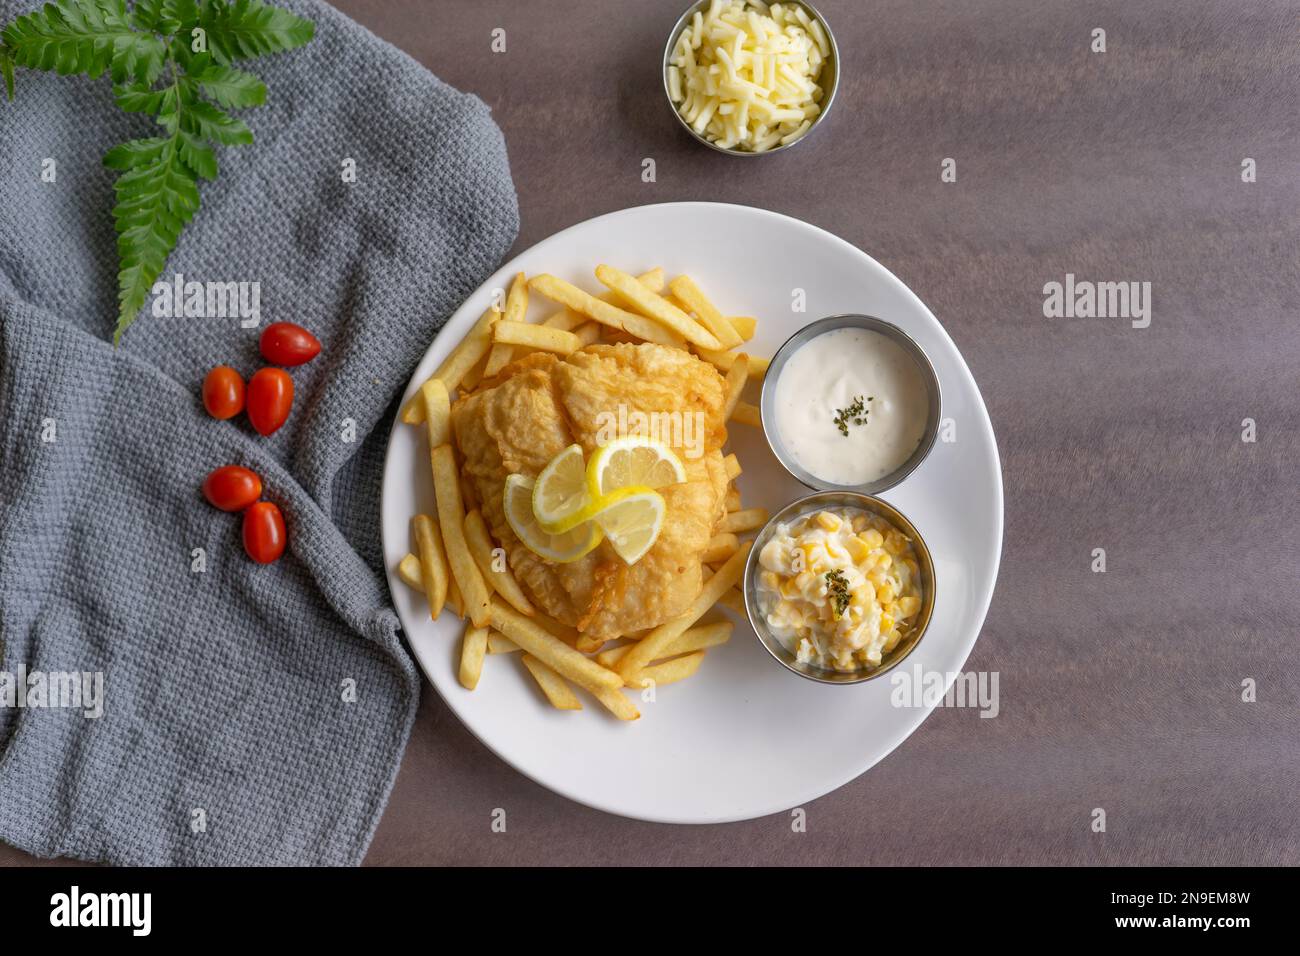 A piece of battered fish with chips on a white plate on a wooden table Stock Photo